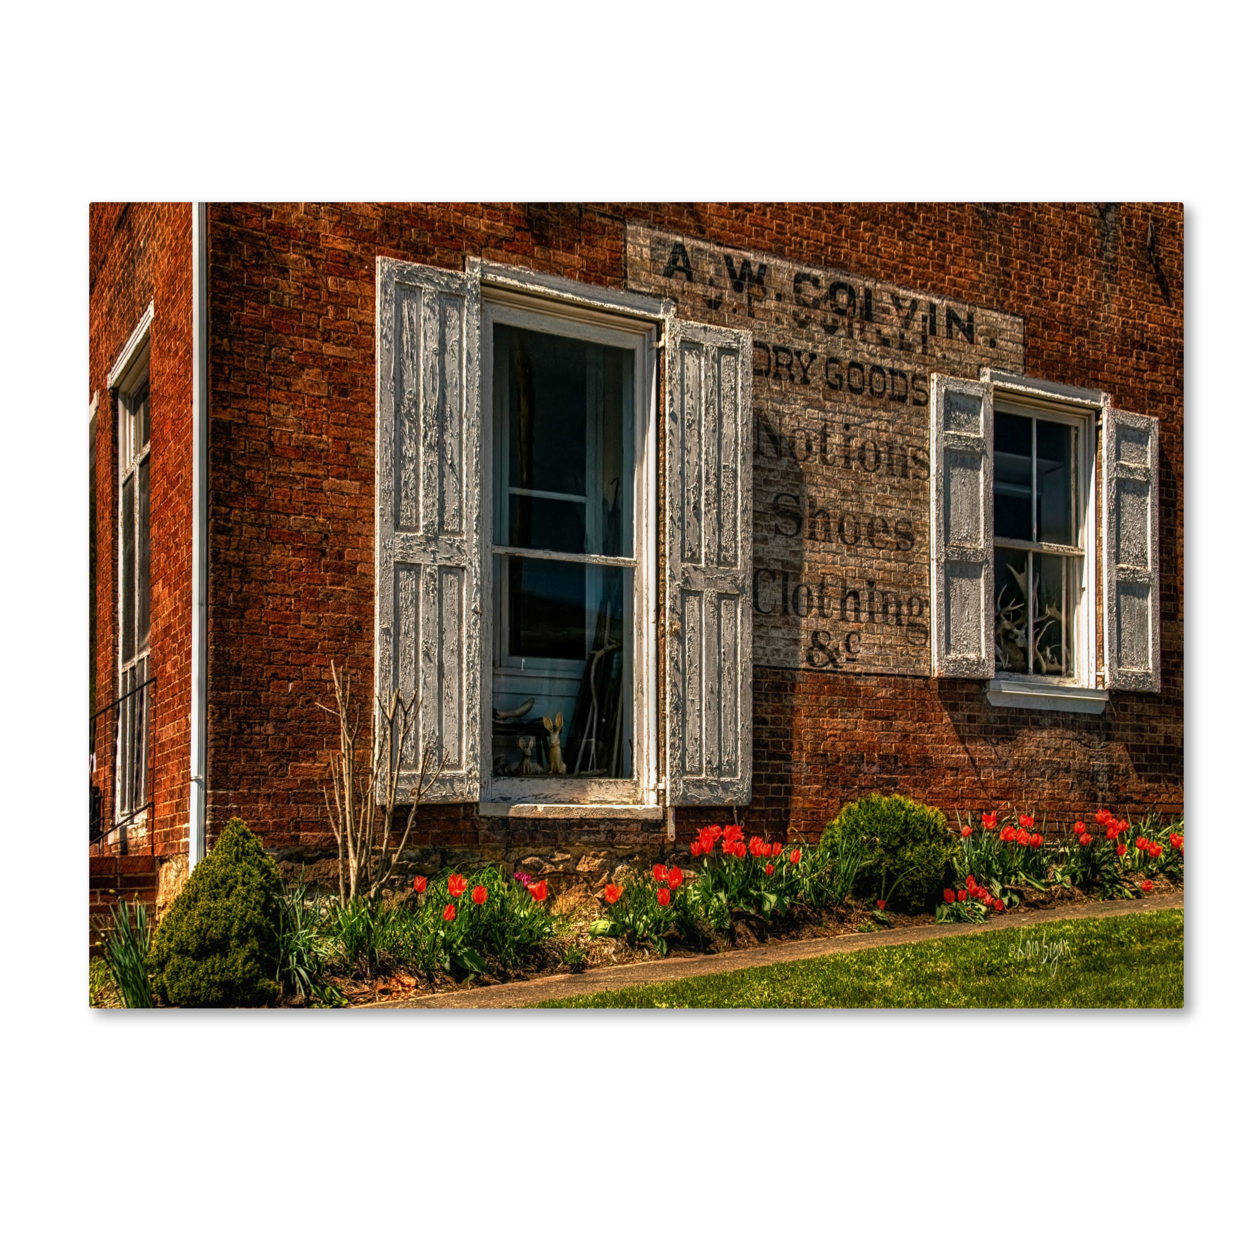 Lois Bryan 'Country Store' Canvas Art 16 X 24